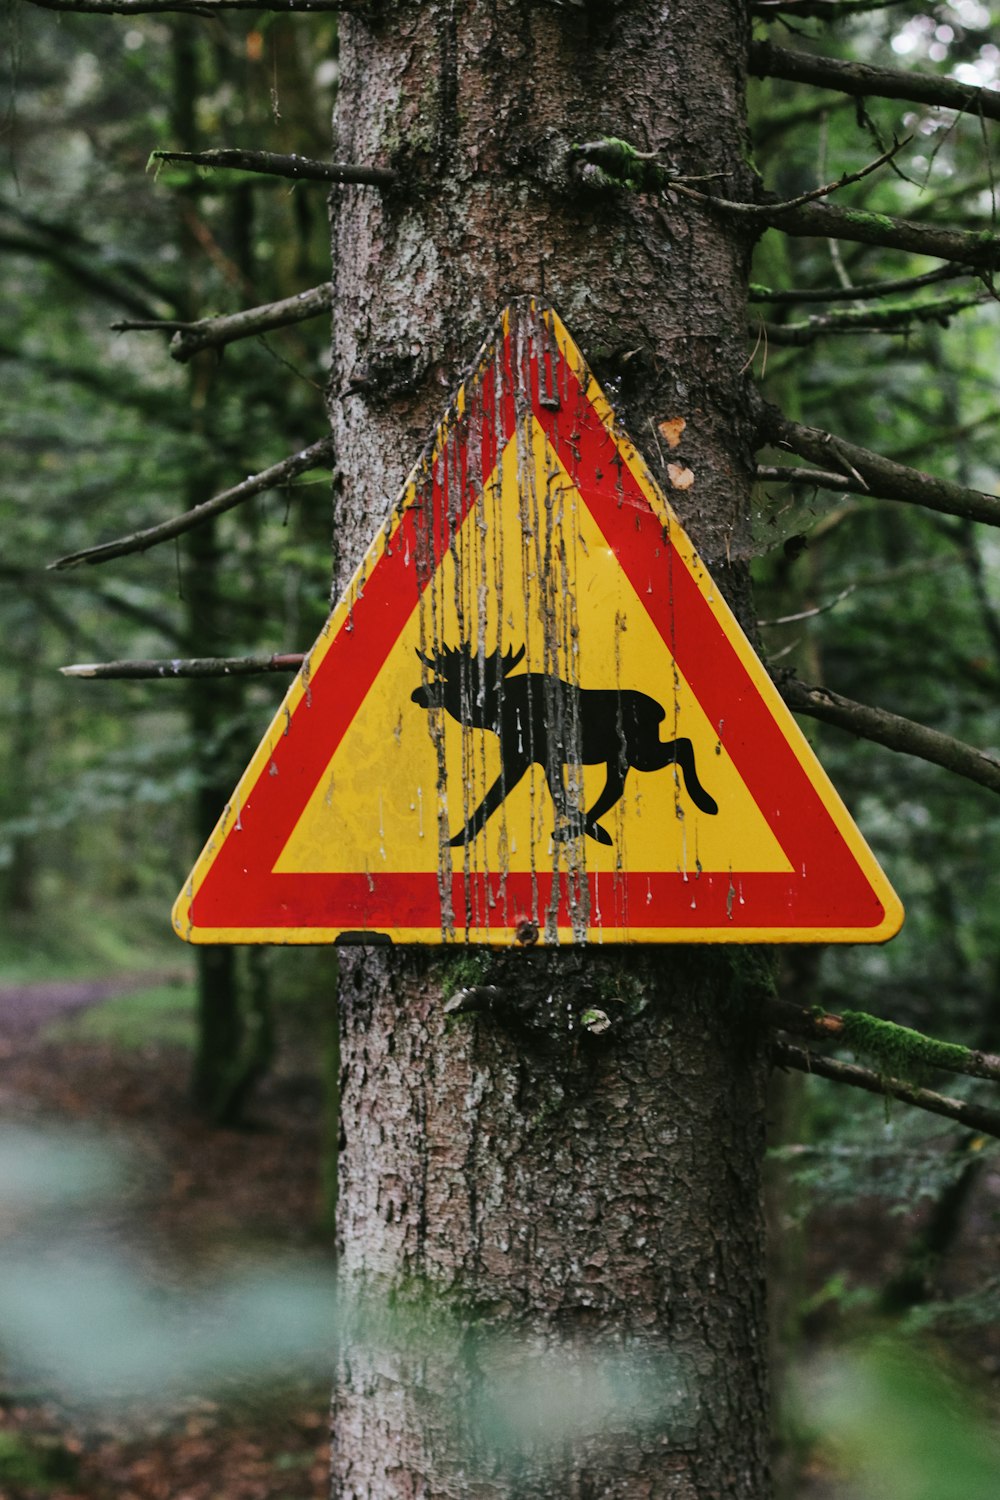 a warning sign on a tree in a forest